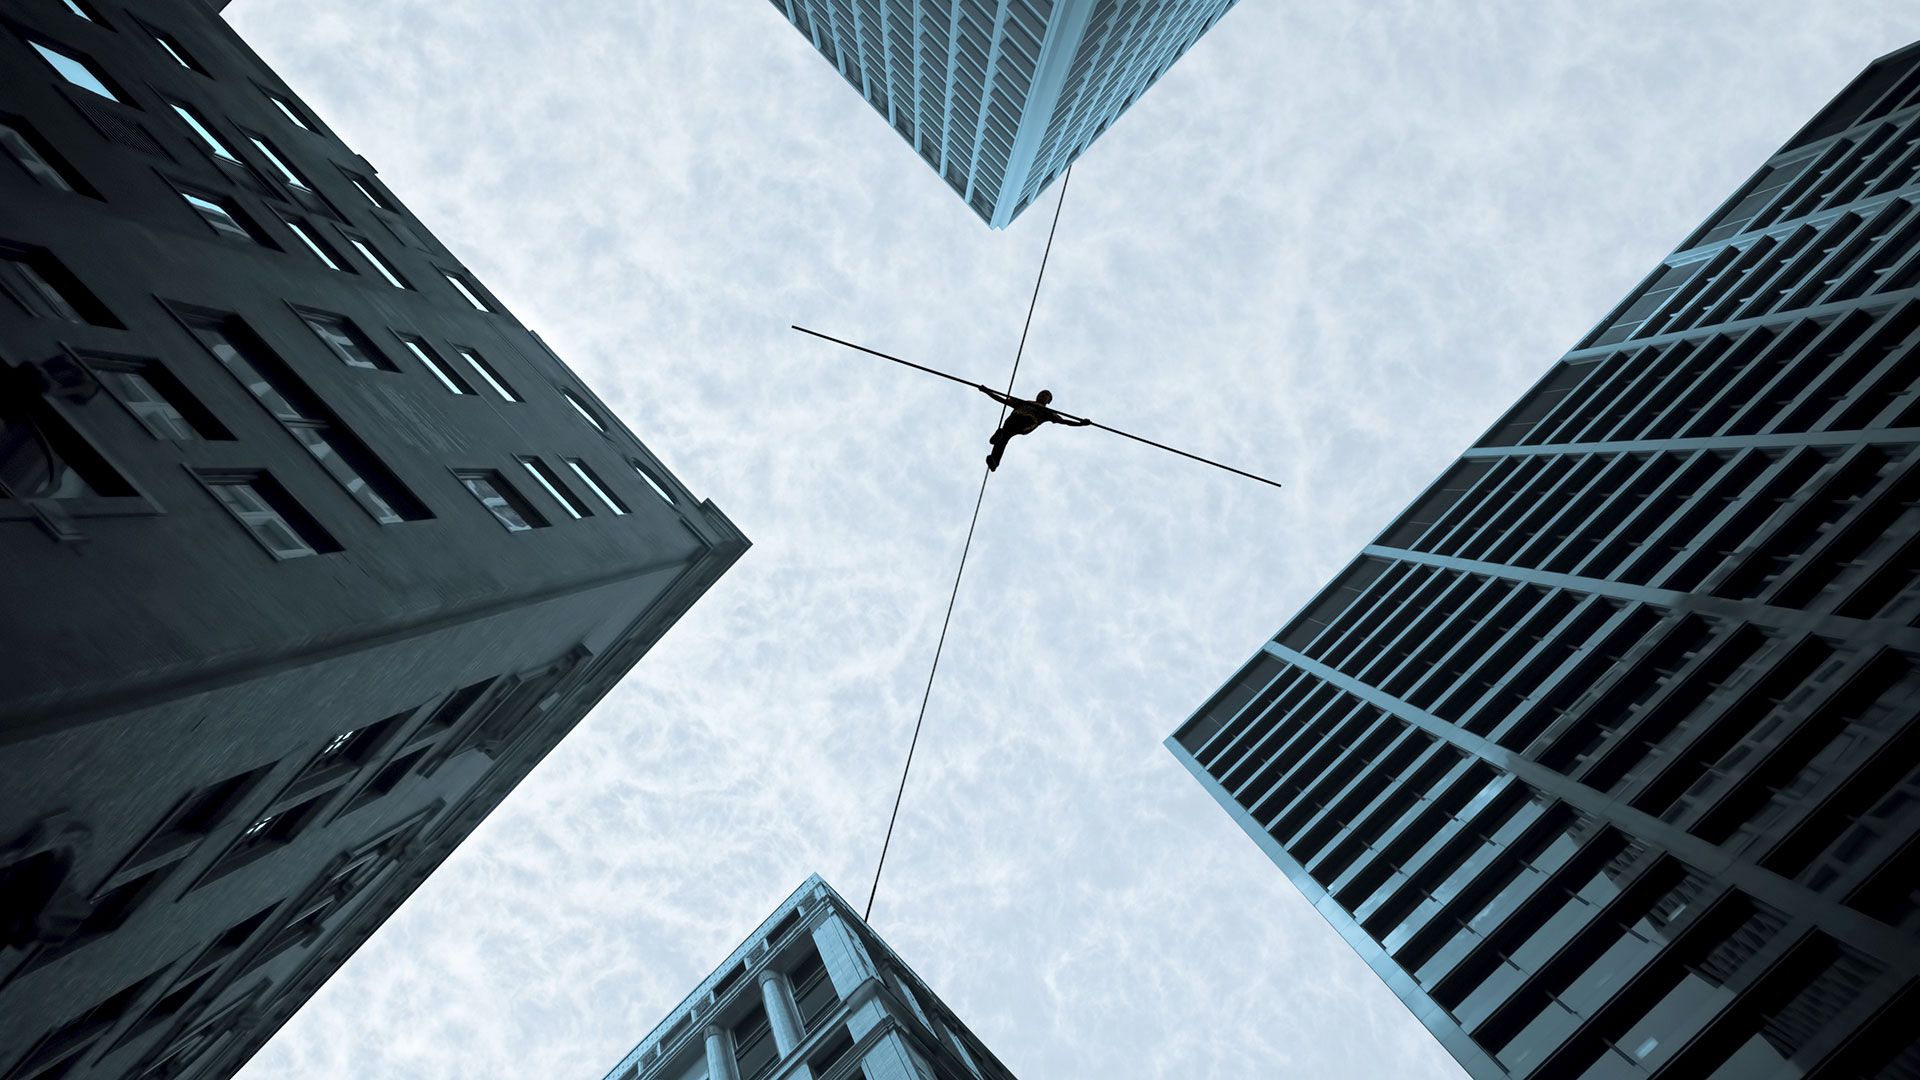 A person walking a tightrope between office buildings